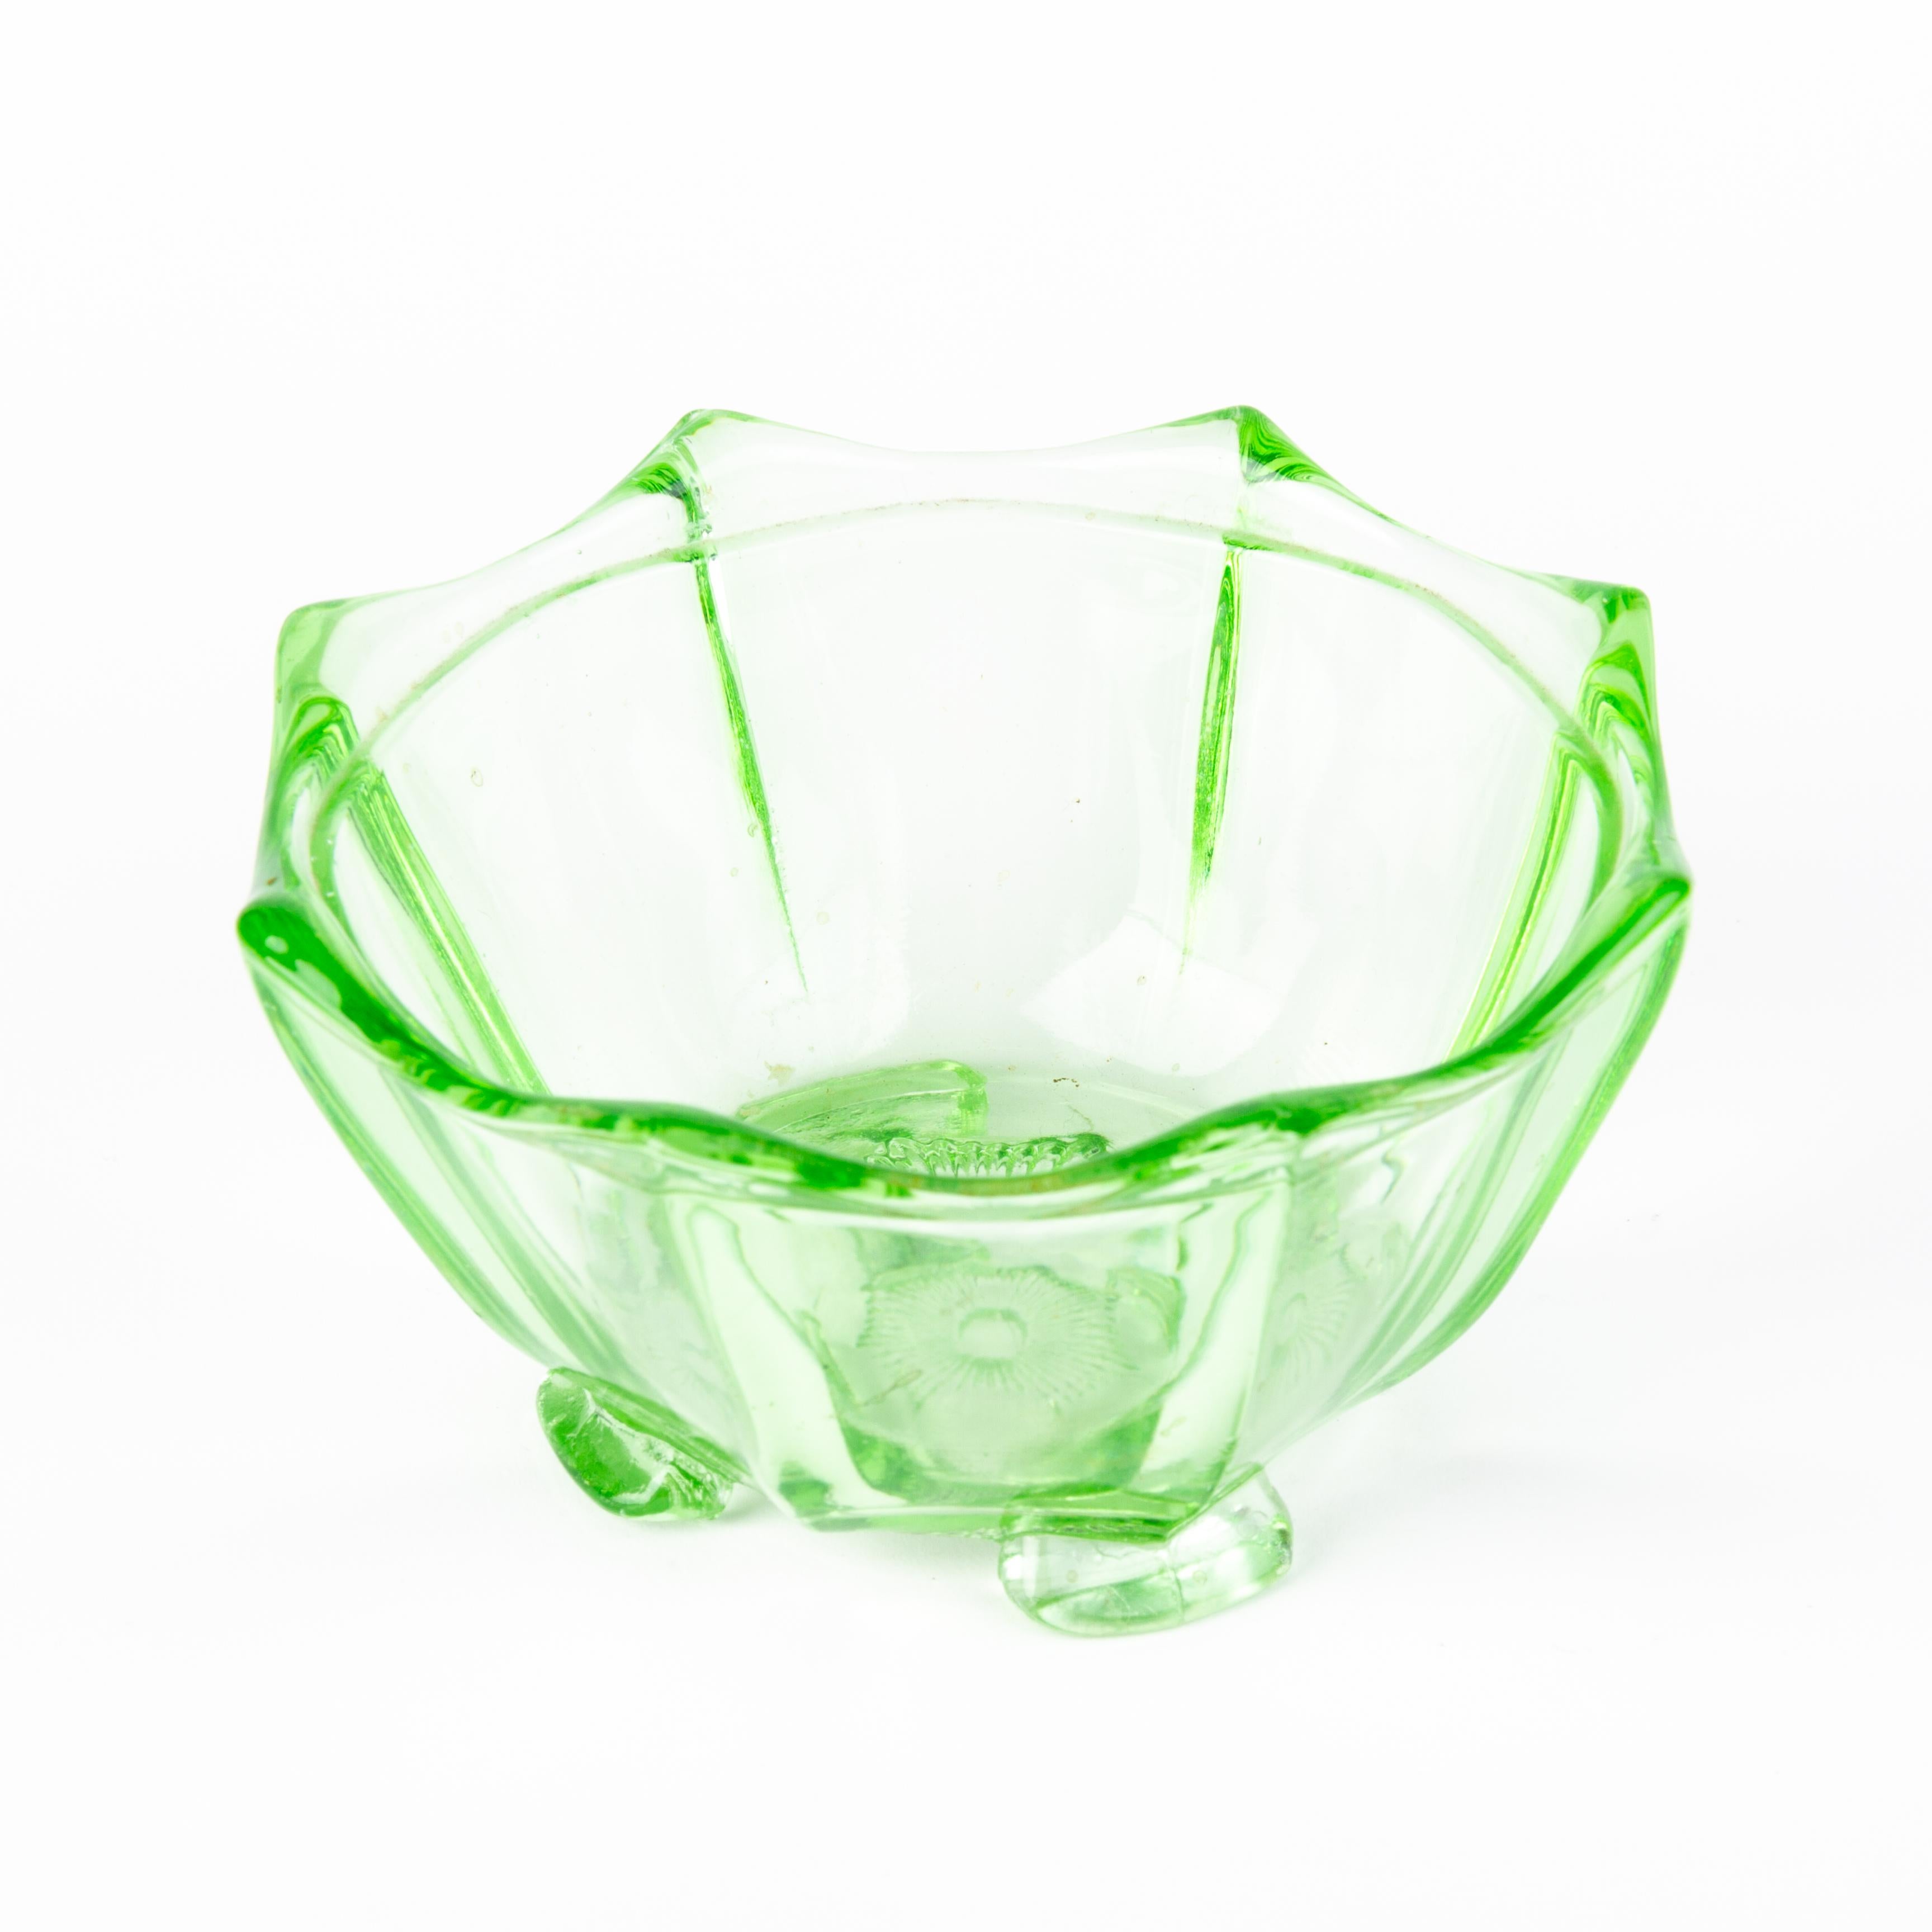 Art Deco Uranium Glass Fluted Centerpiece Sweets Bomboniere Bowl 1930s
Good condition
From a private collection.
Free international shipping.